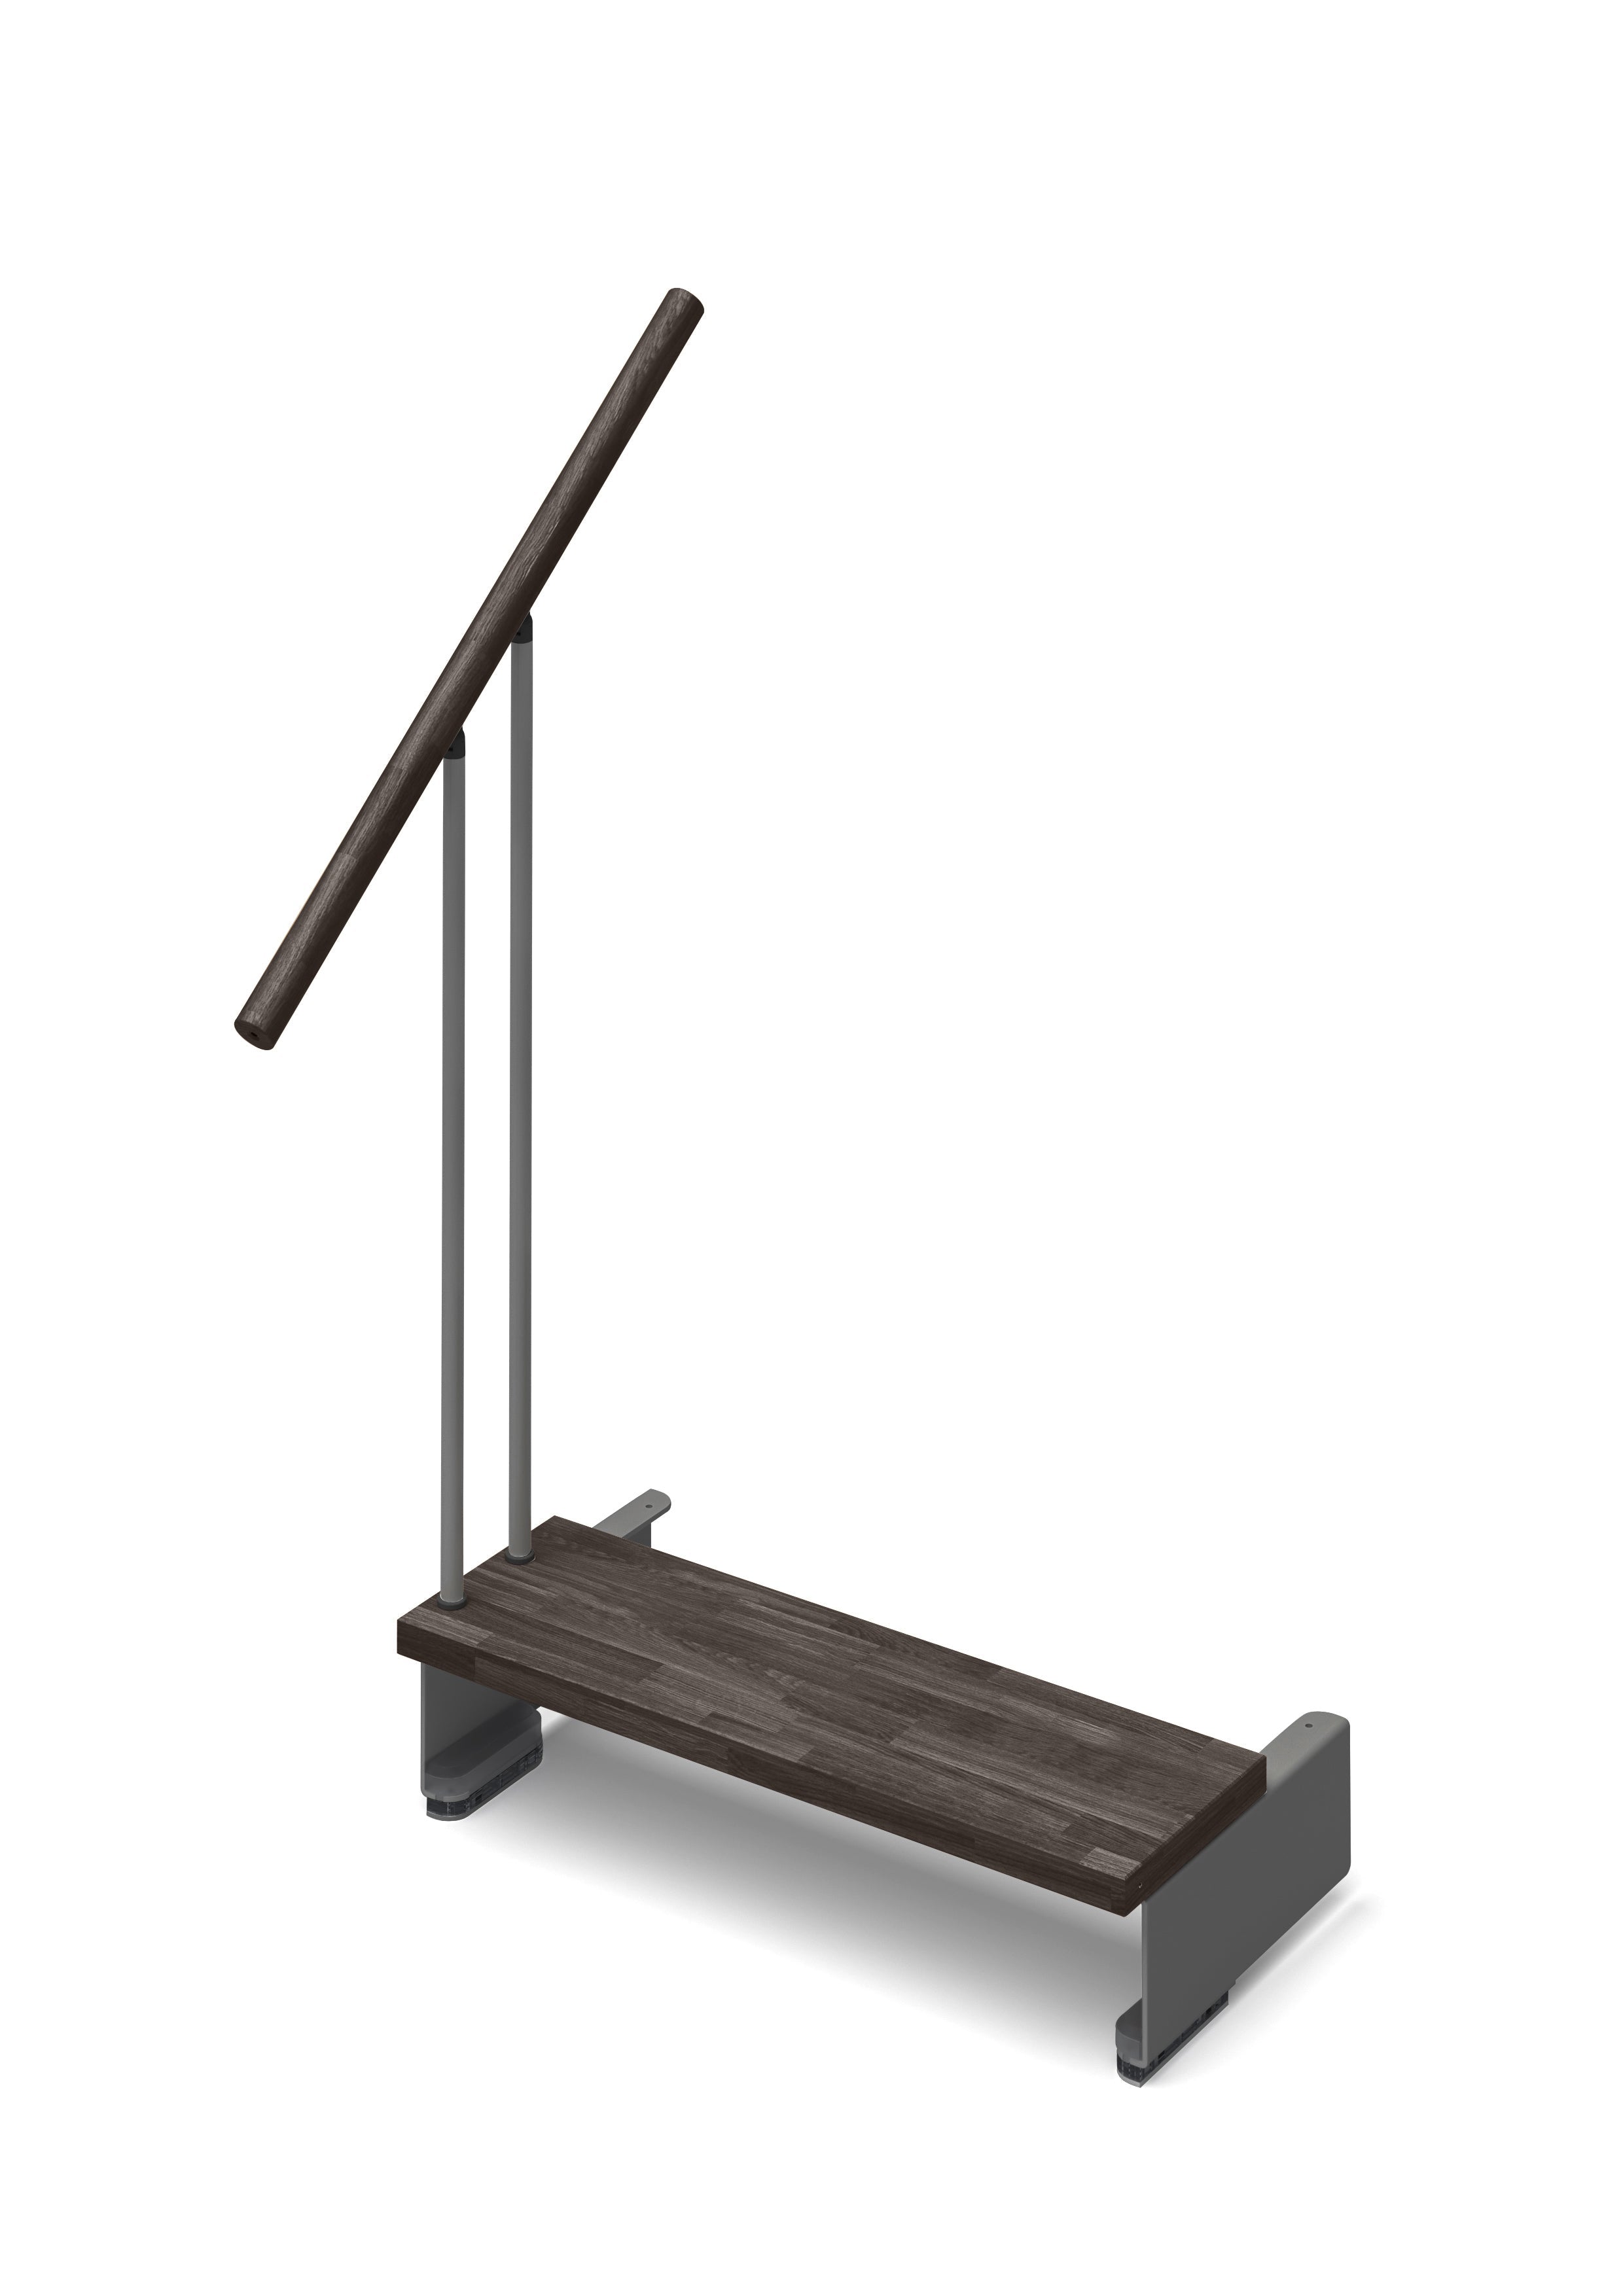 Additional step Adapta 94cm (with structure and railing) - Wengé 23